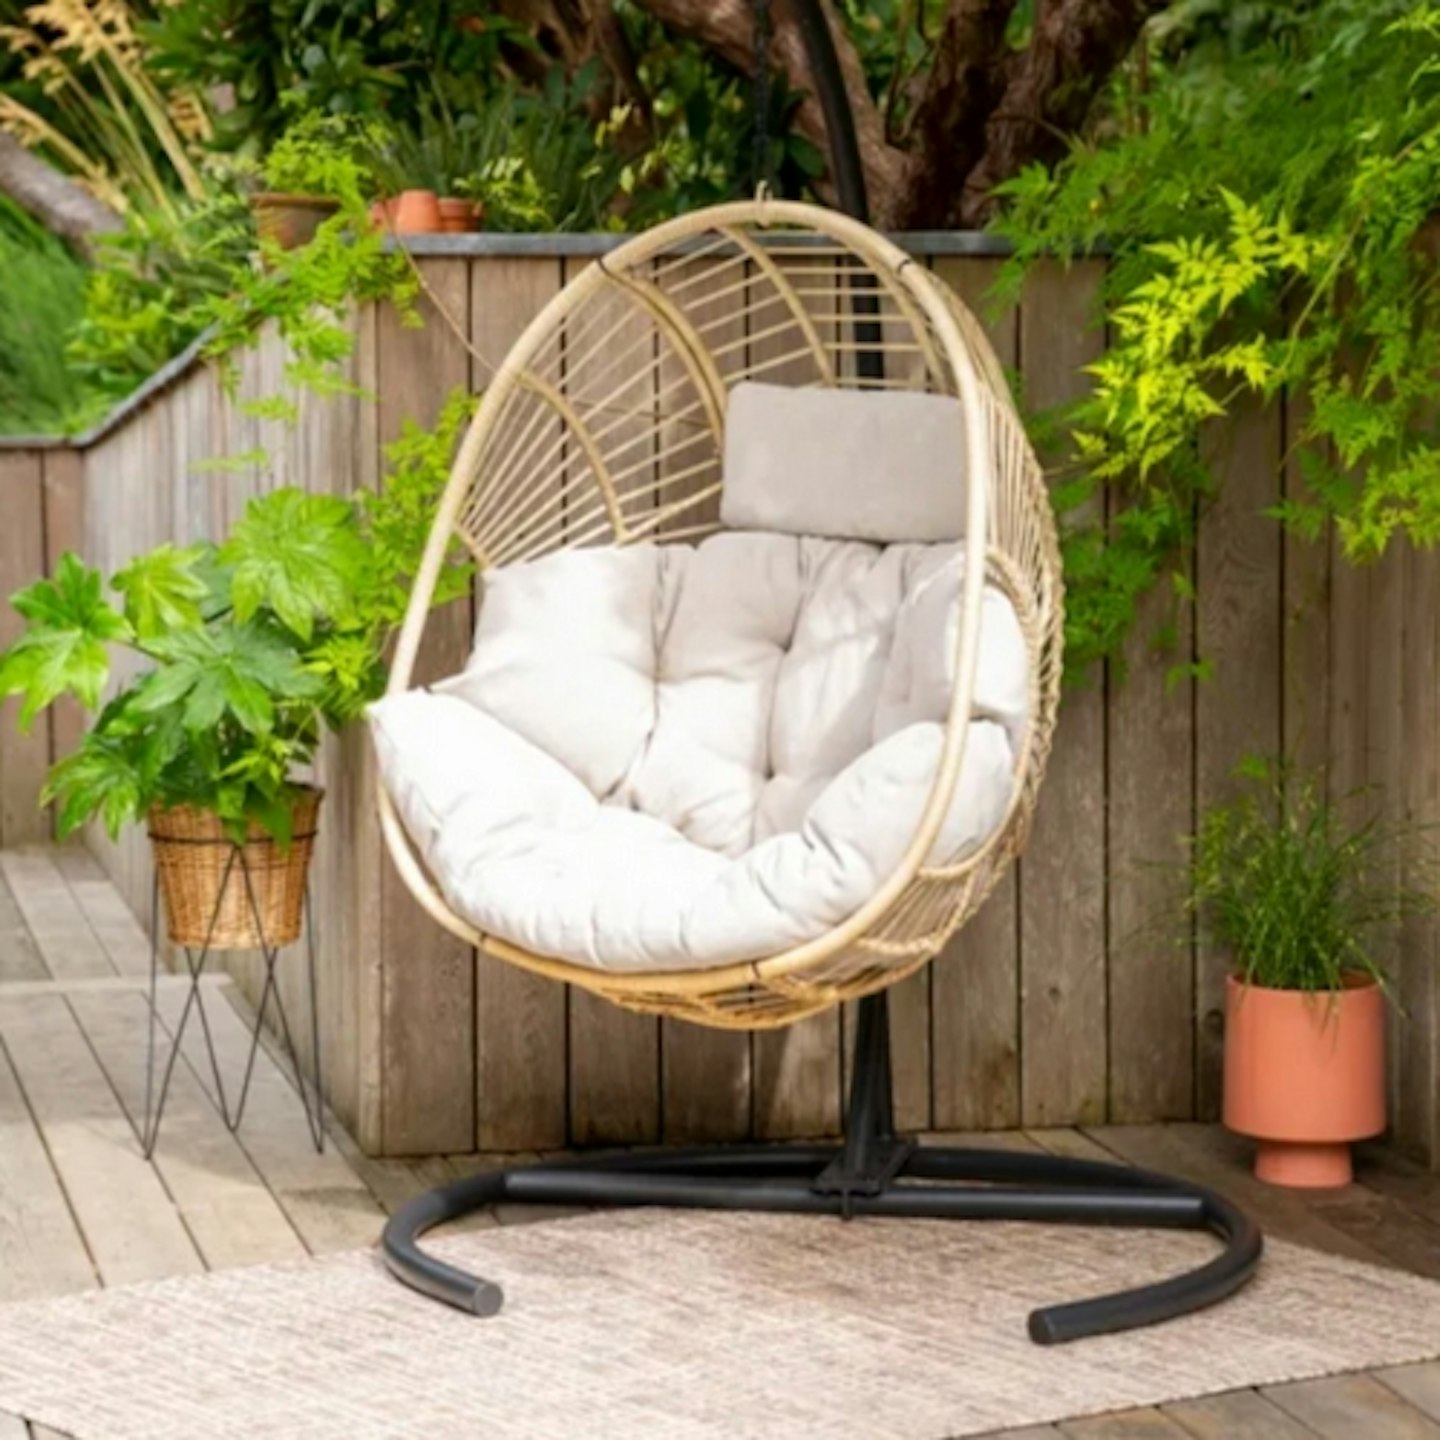 Aldi Double Hanging Egg Chair Dunelm Singapore Hanging Egg Chair